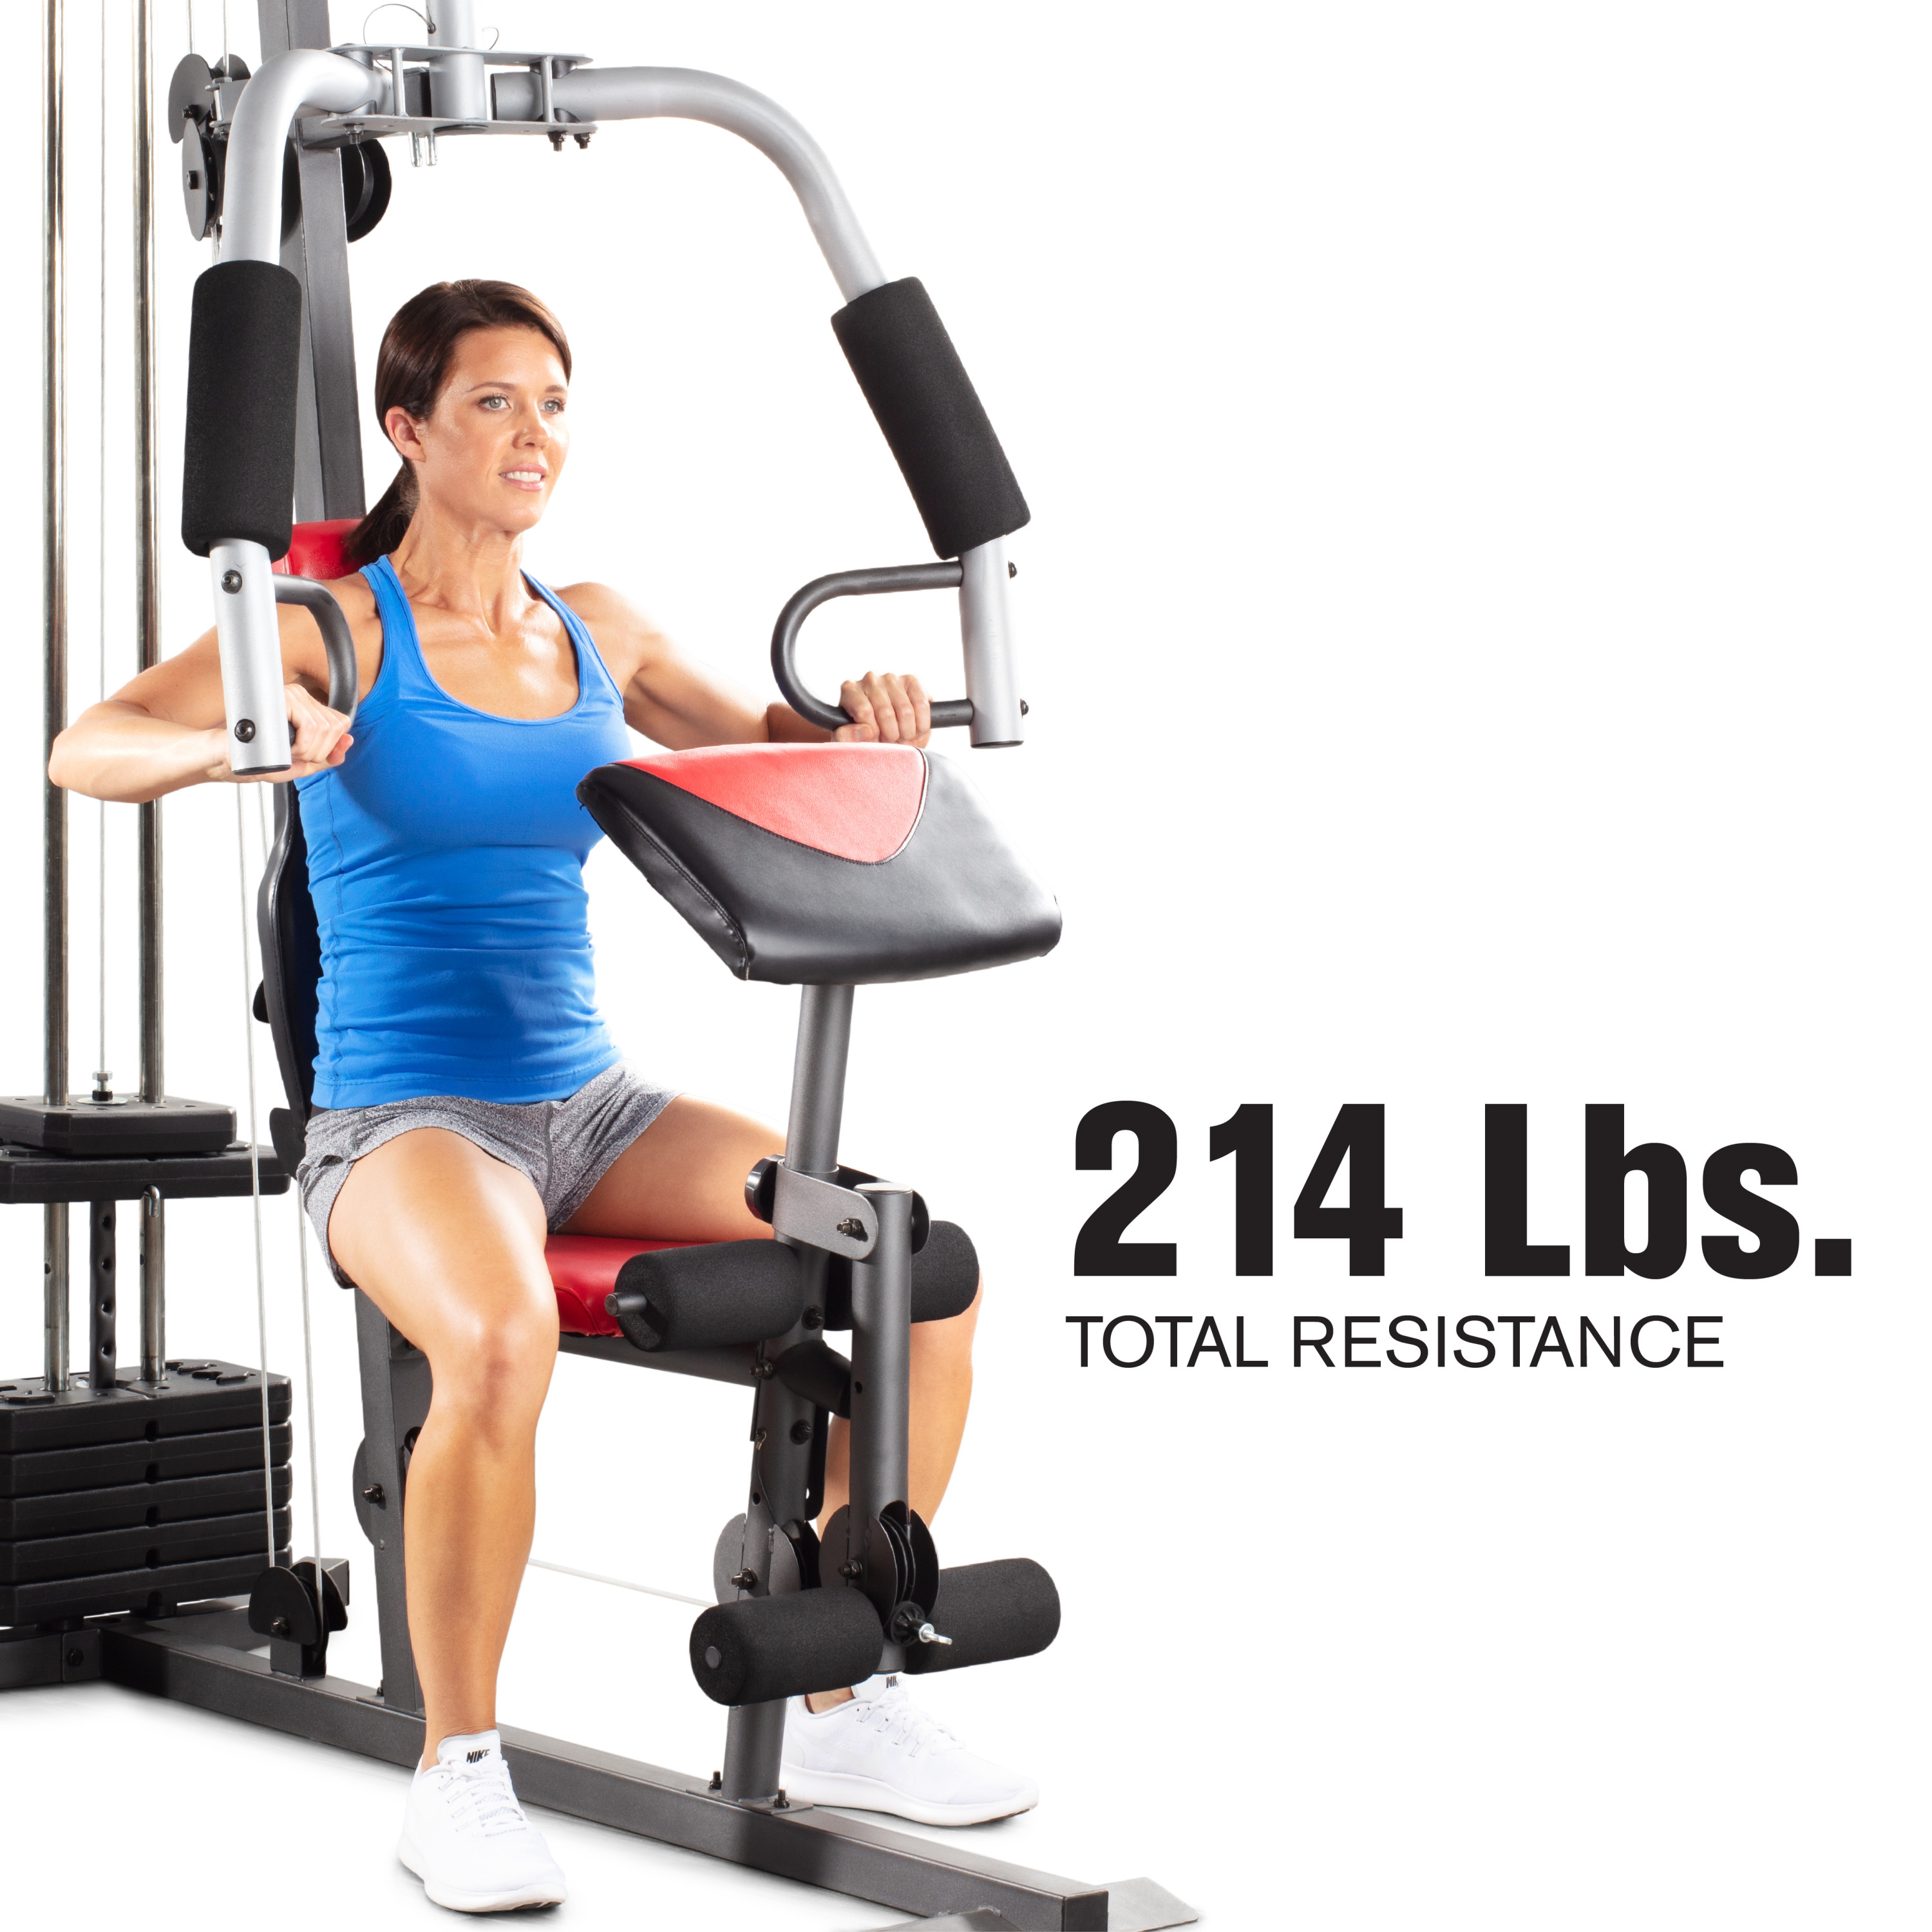 Weider 2980 X Home Gym System with 80 Lb. Vinyl Weight Stack - image 5 of 26